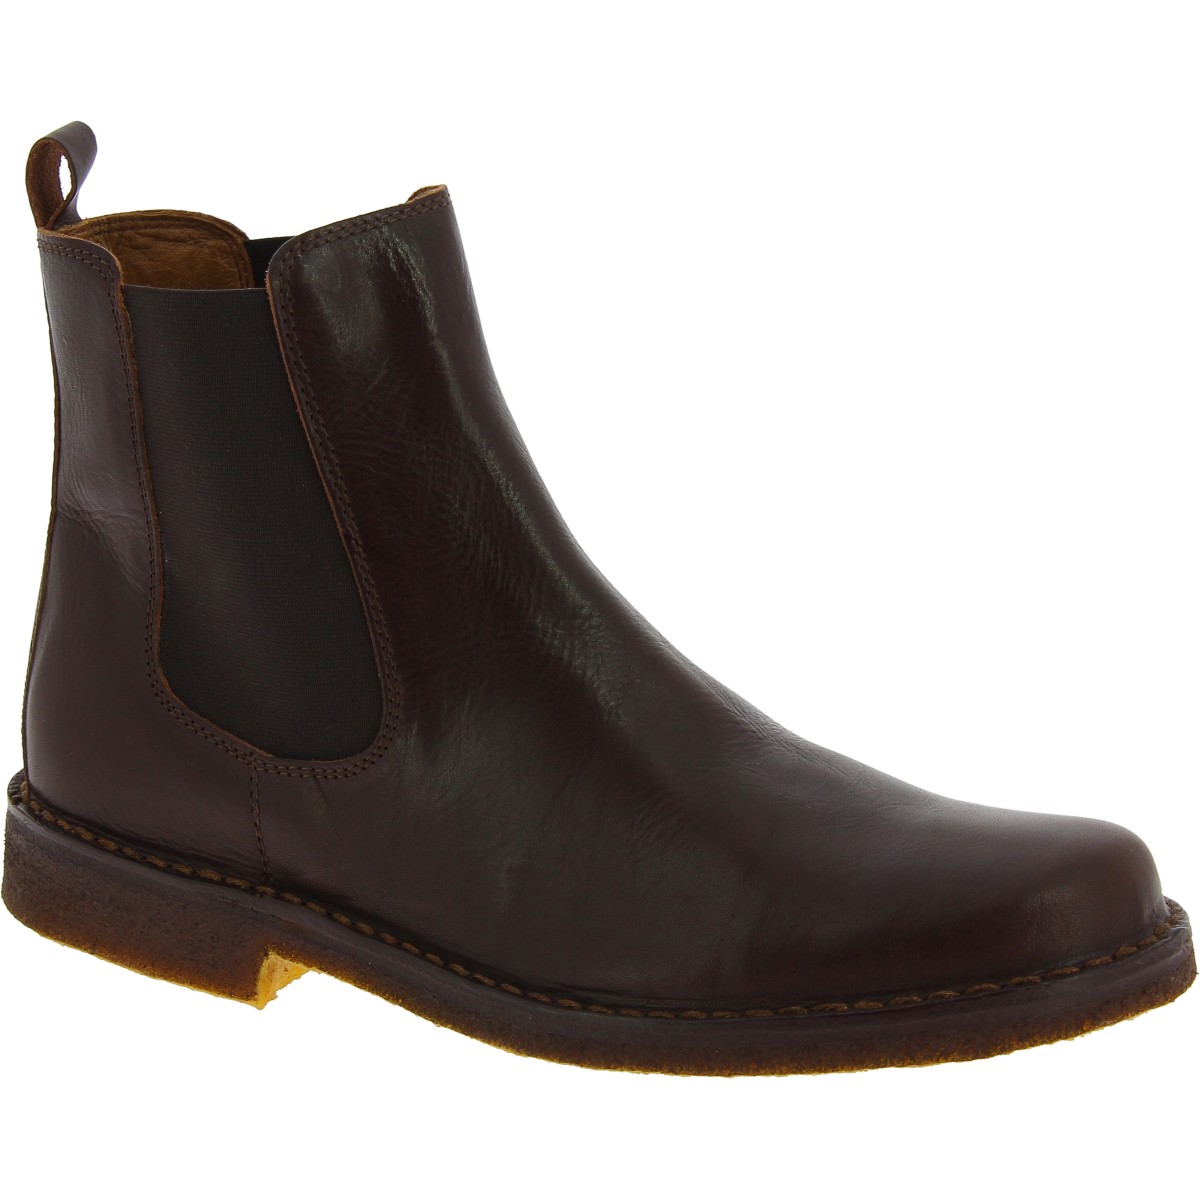 dark leather chelsea boot with natural rubber sole | The leather craftsmen